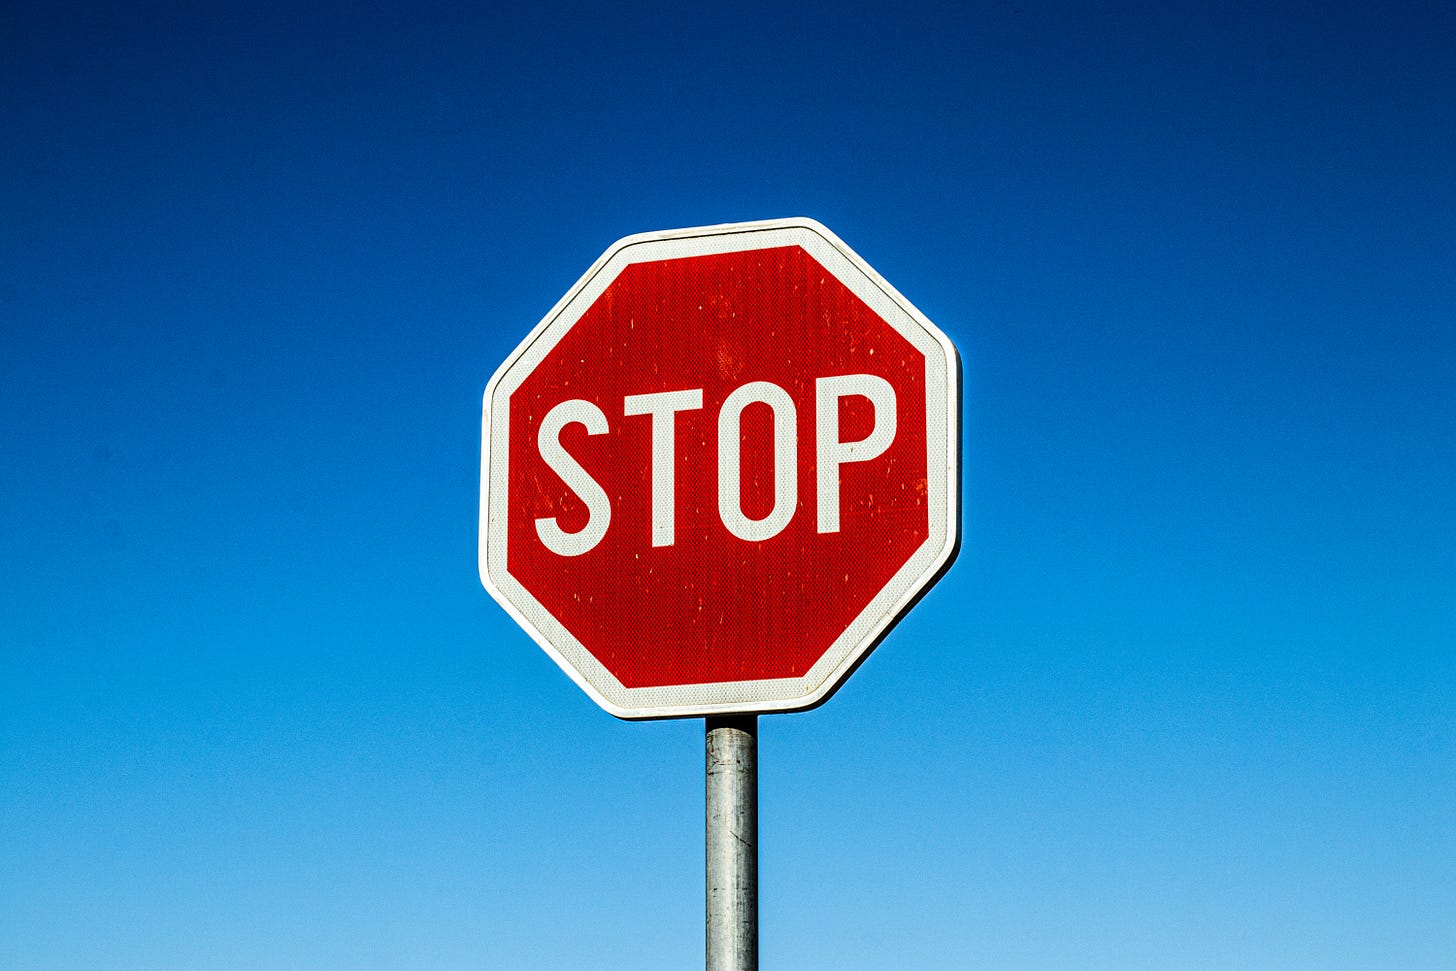 A red stop sign standing in front of a blue sky.